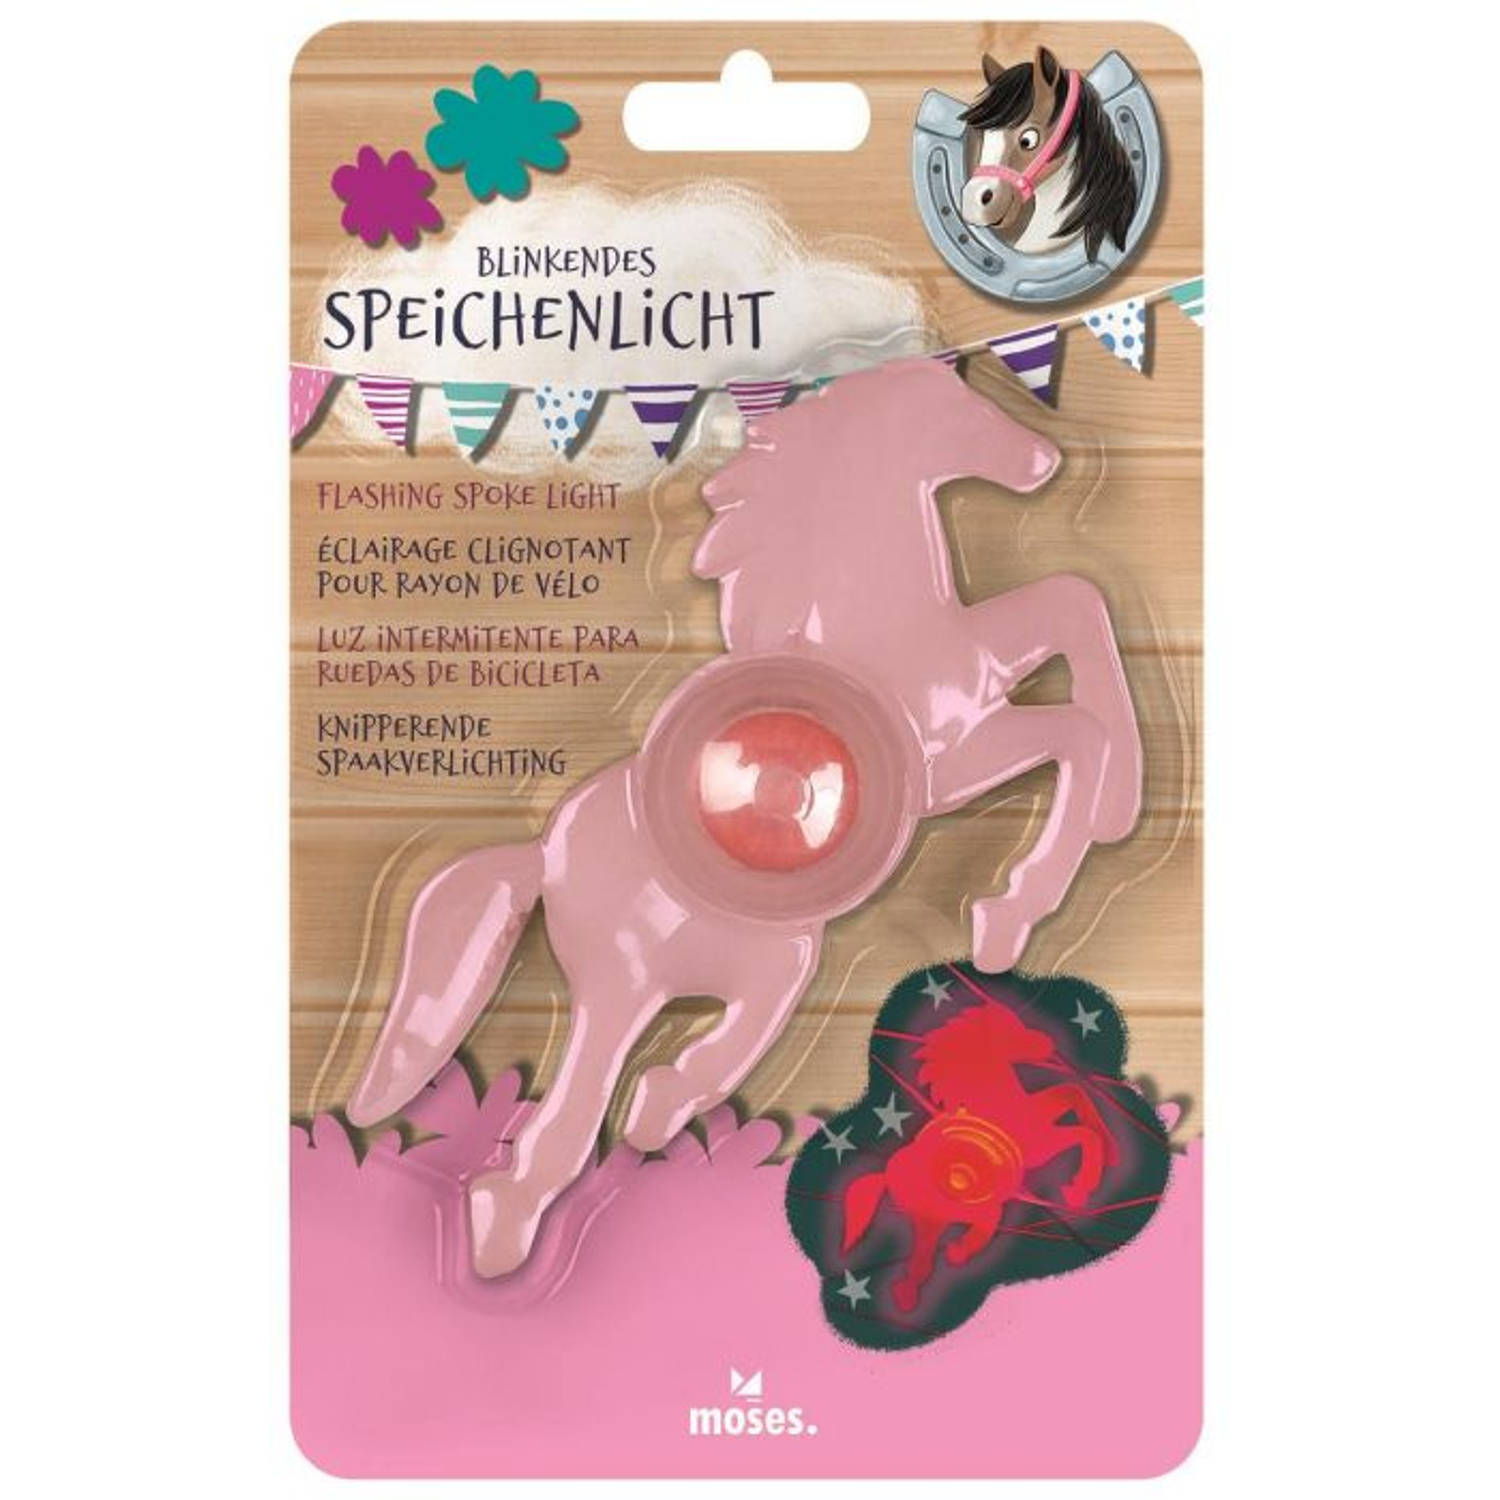 Moses spaakverlichting Paard meisjes 12,5 x 3,5 x 2 cm roze-rood